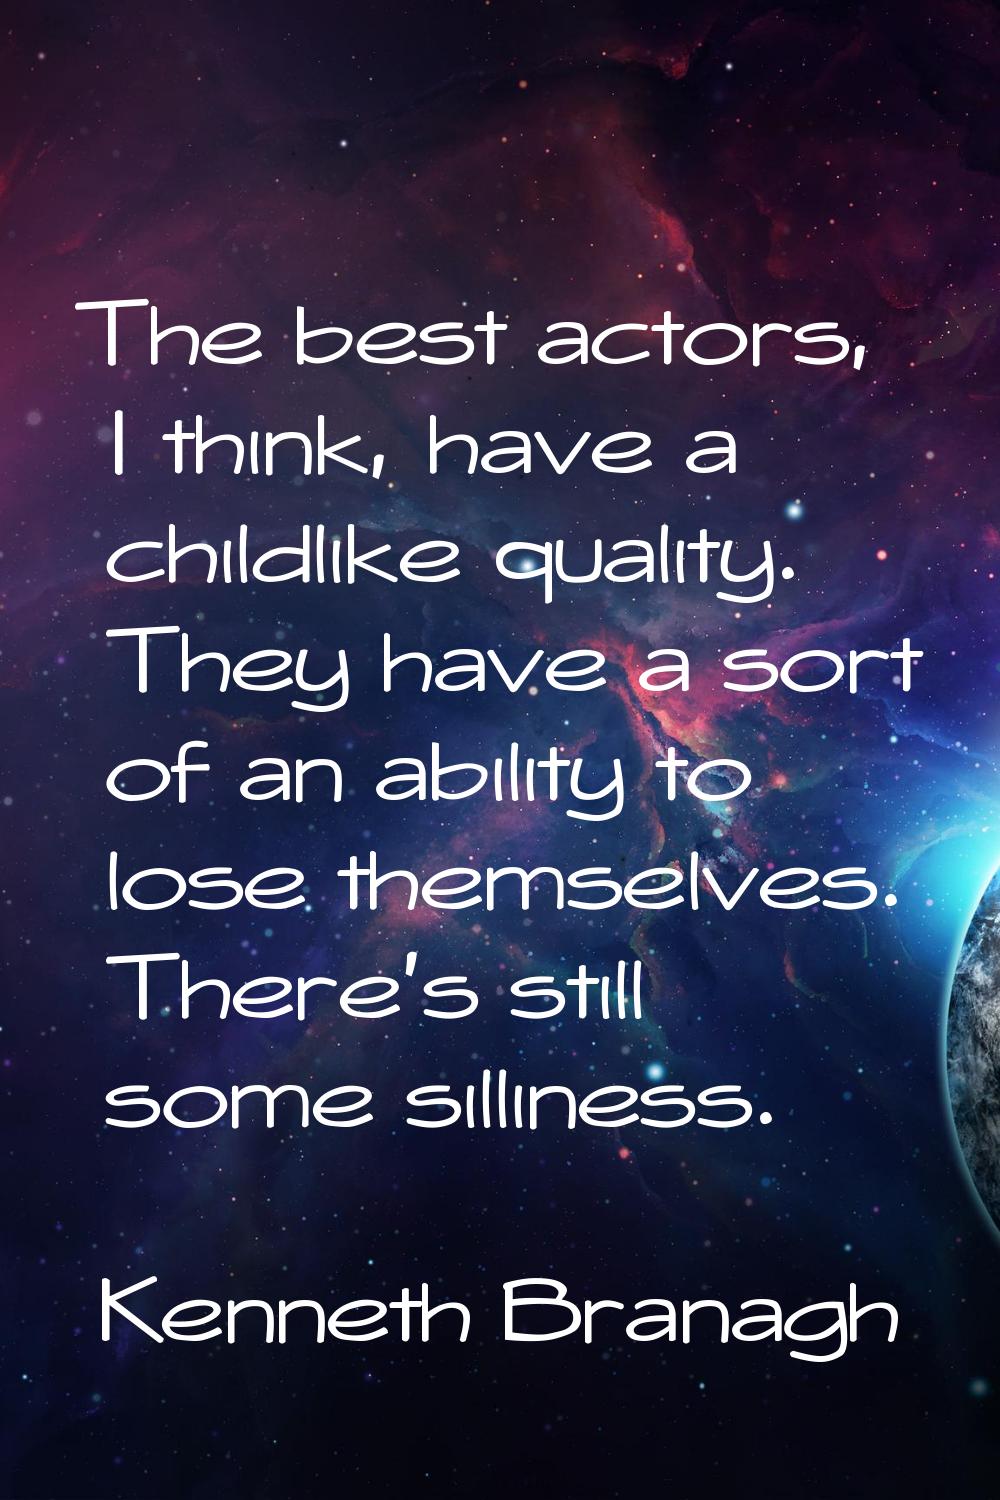 The best actors, I think, have a childlike quality. They have a sort of an ability to lose themselv